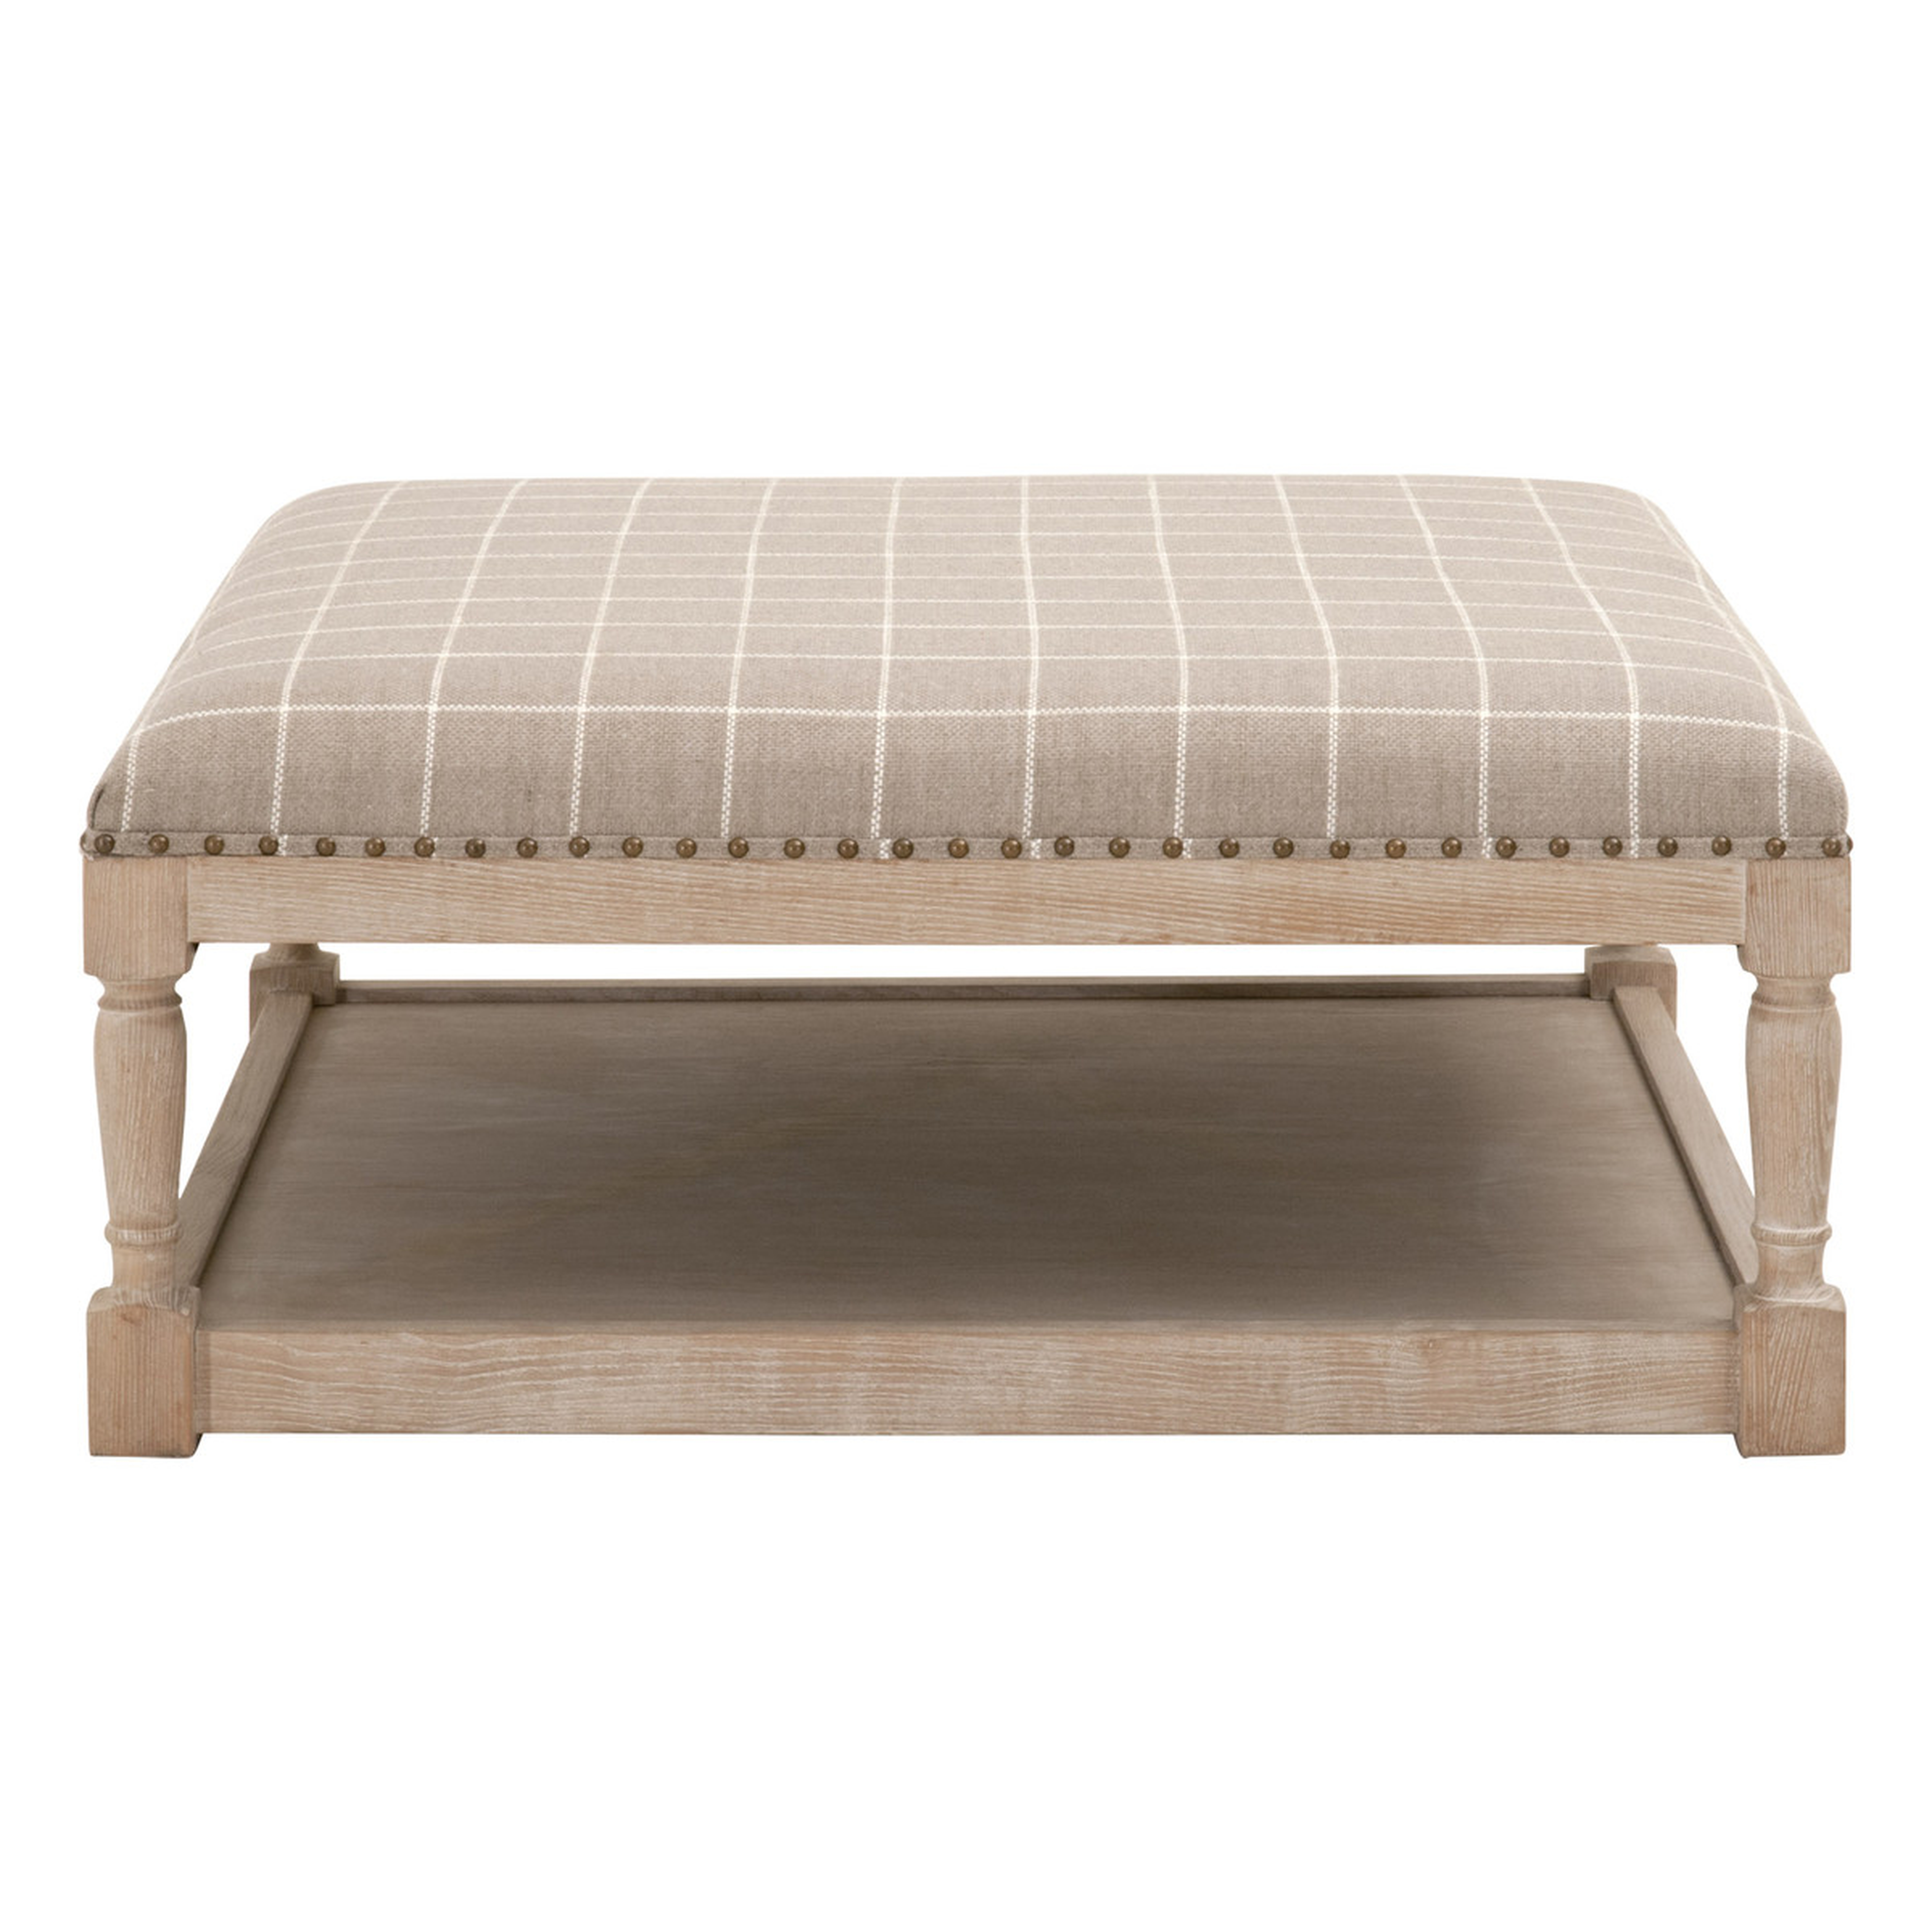 Townsend Upholstered Coffee Table, Pebble - Alder House